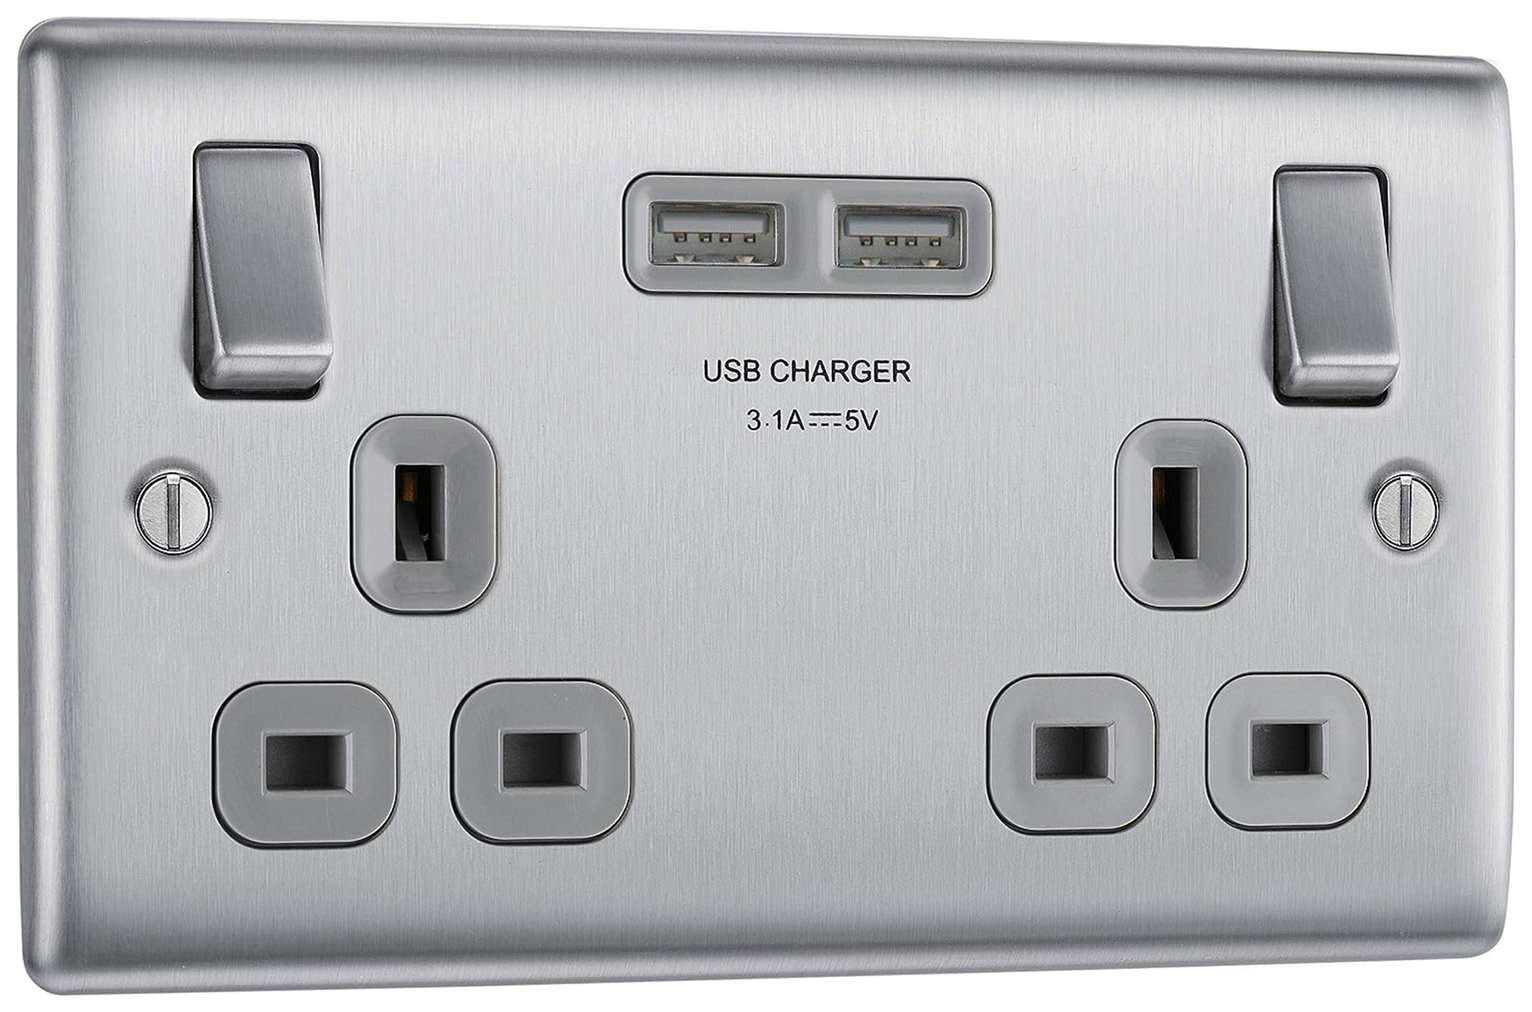 BG 2 Gang Sockets with 2 X USB 3.1 Sockets - Stainless Steel